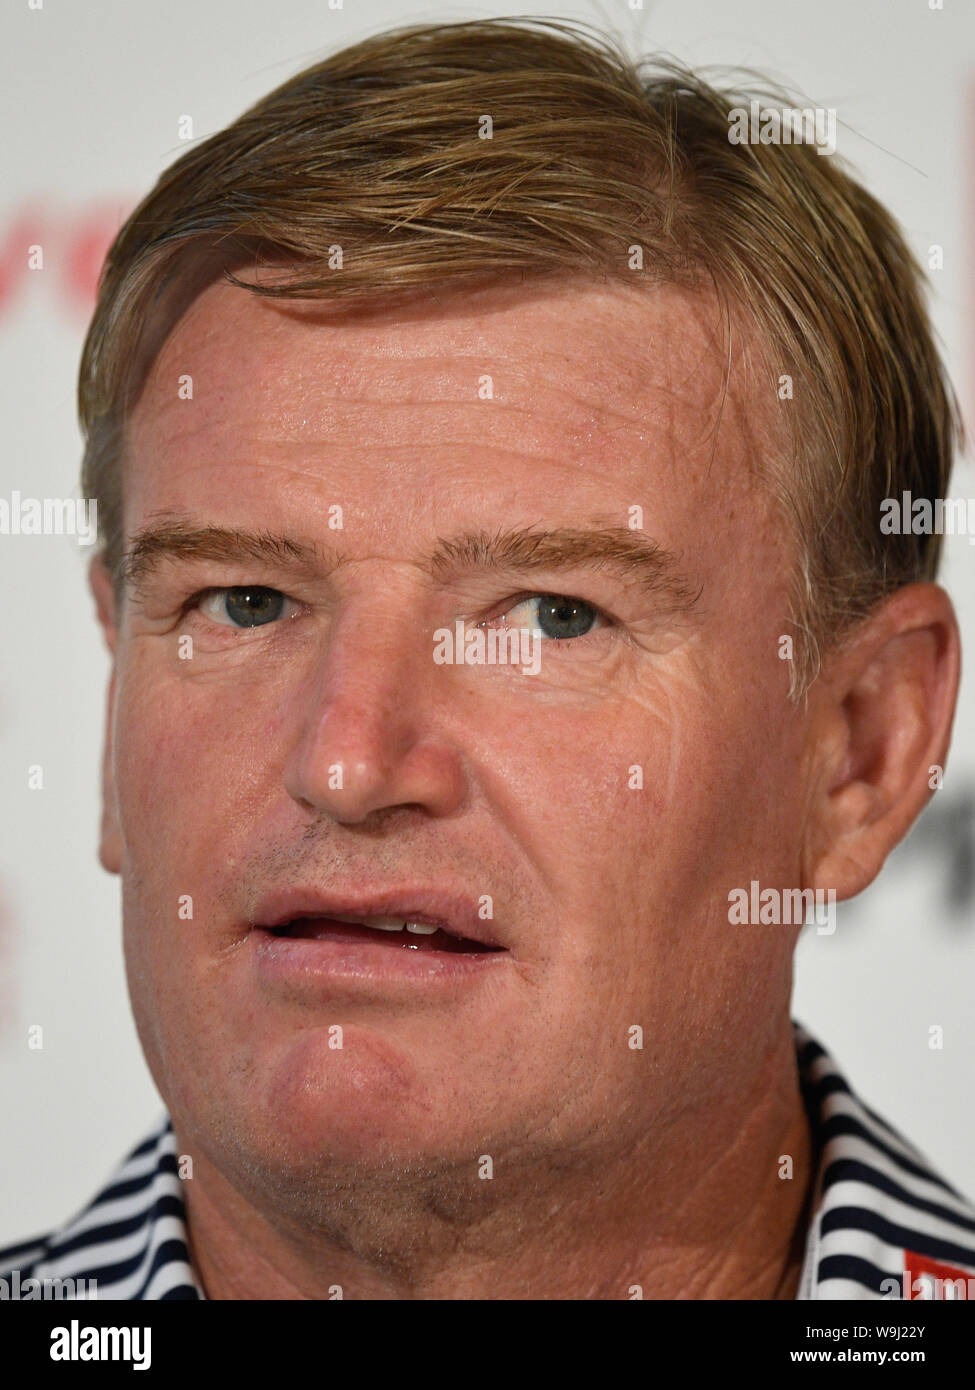 Golf player Ernie Els speaks during the press conference prior to D+D REAL CZECH MASTERS 2019 golf tournament of European Tour in Prague, Czech Republ Stock Photo